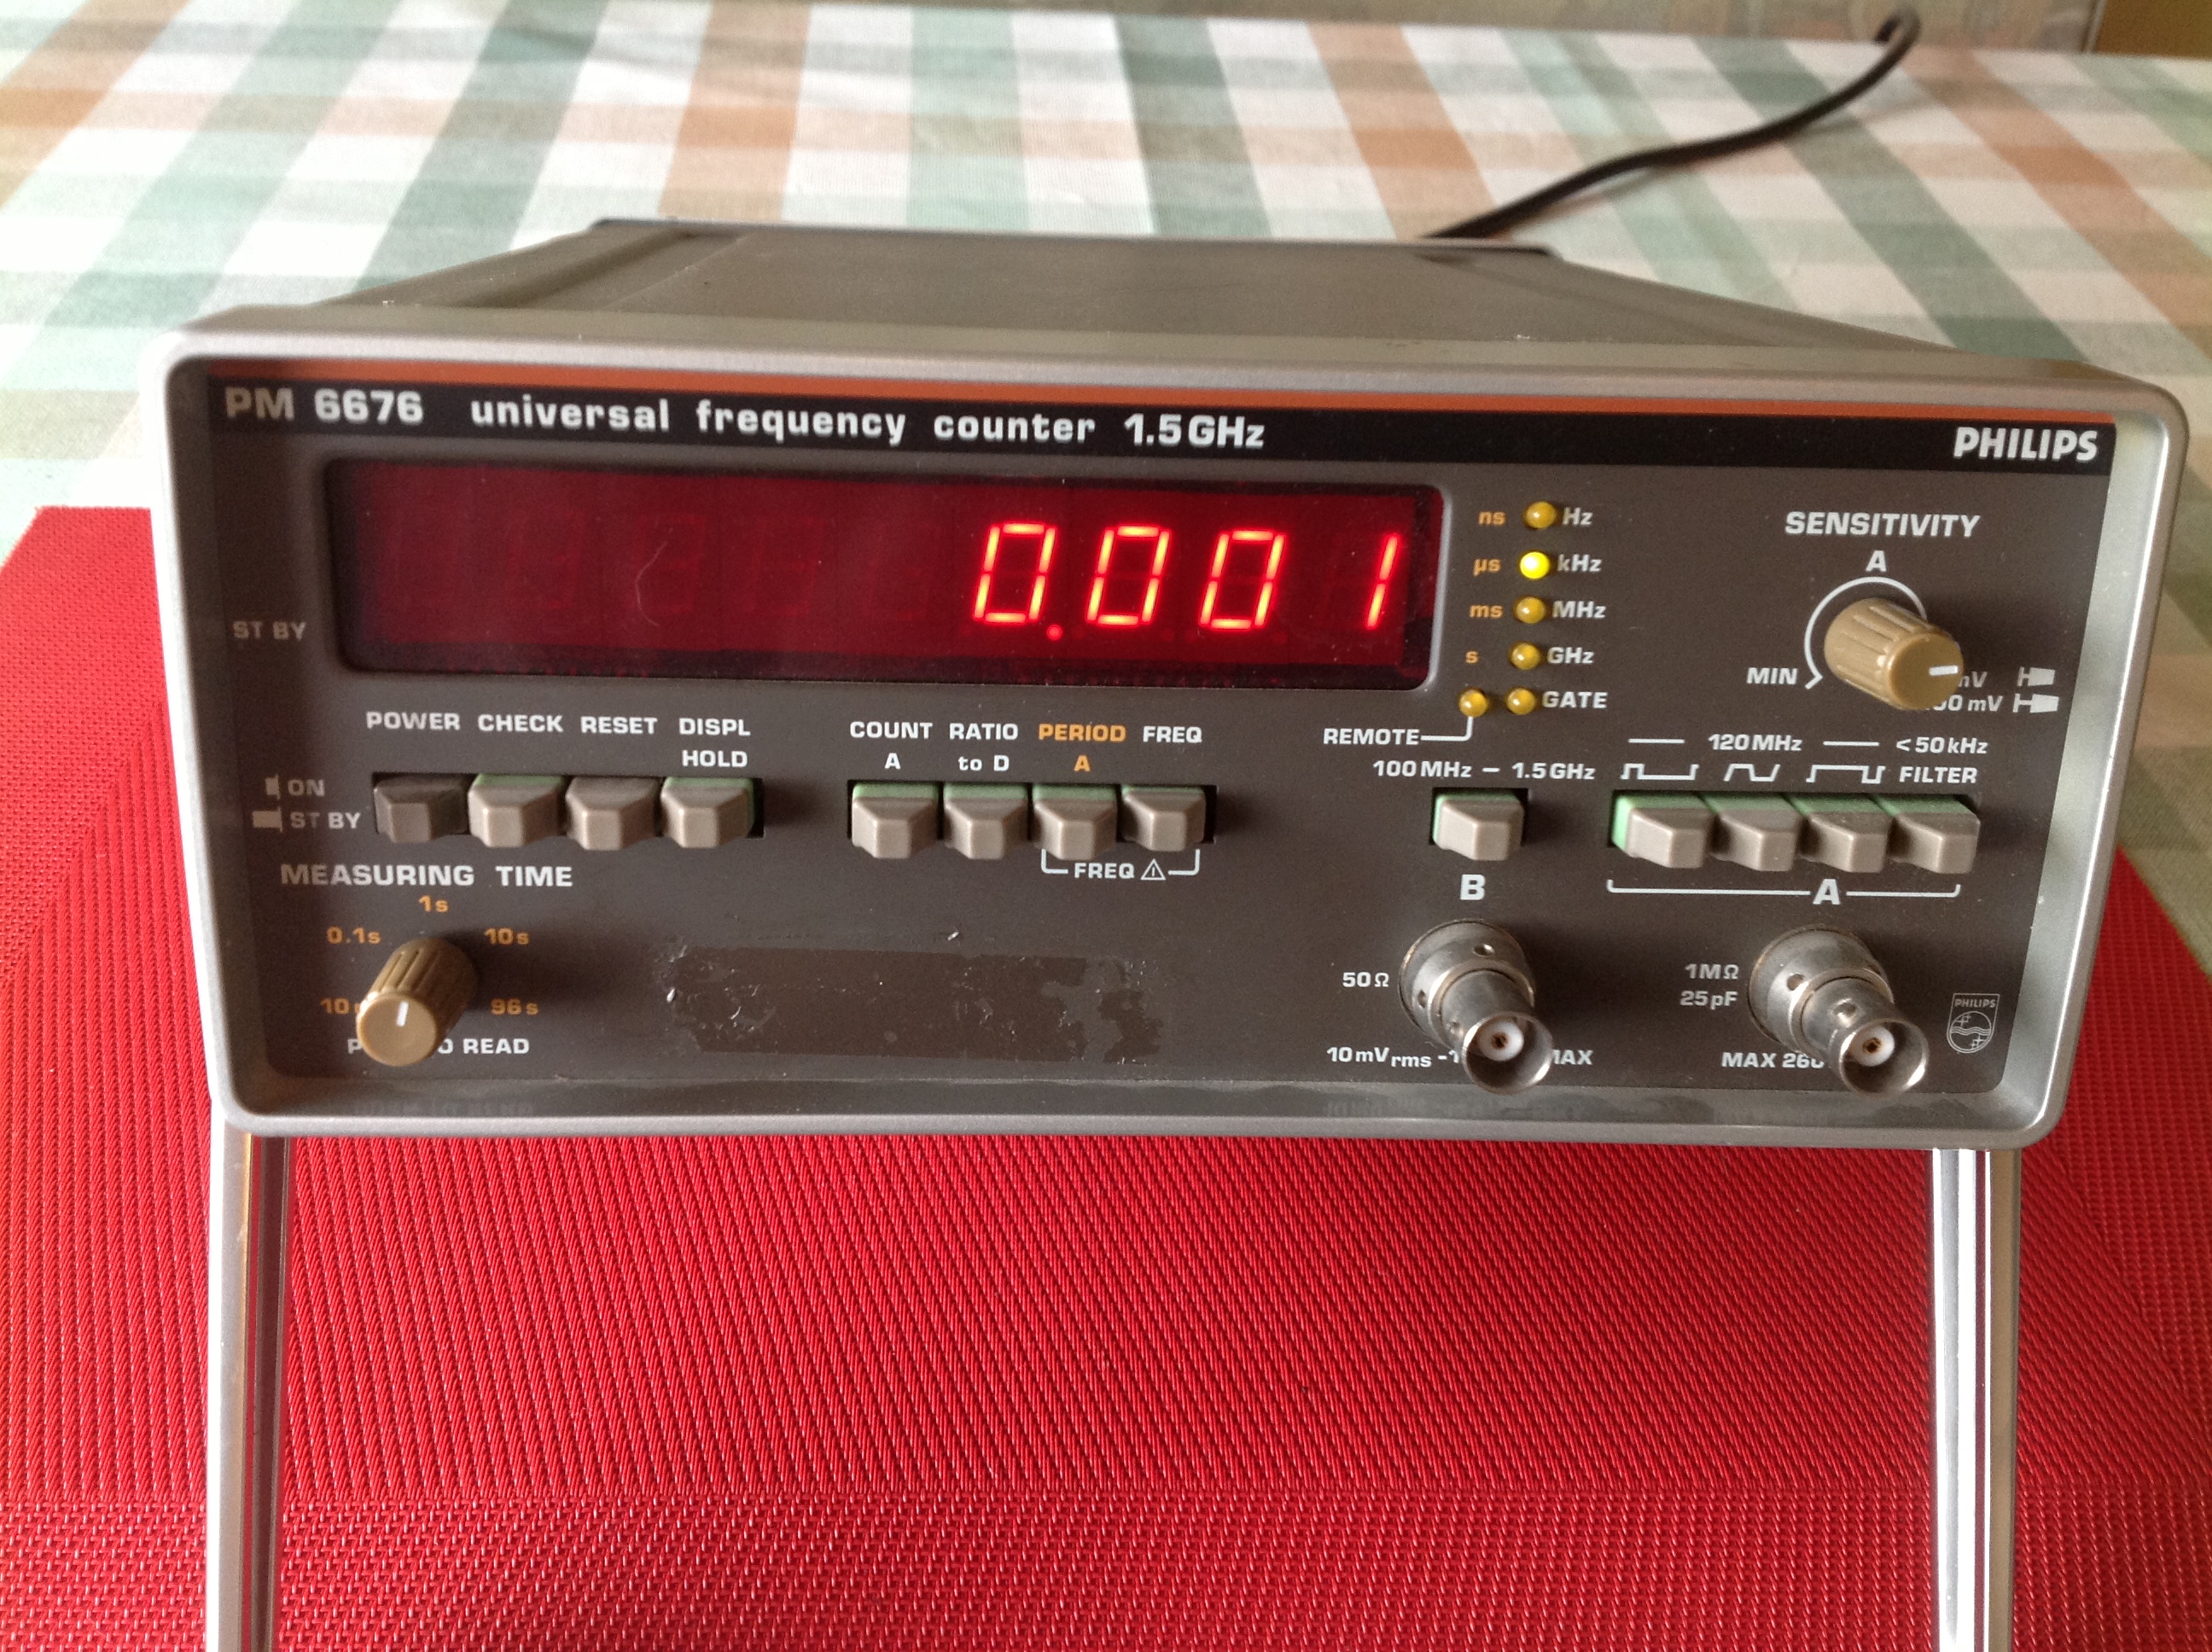 Philips Frequenzmessgerät - Universal Frequency Counter Typ PM 6676 10....1500 MHz